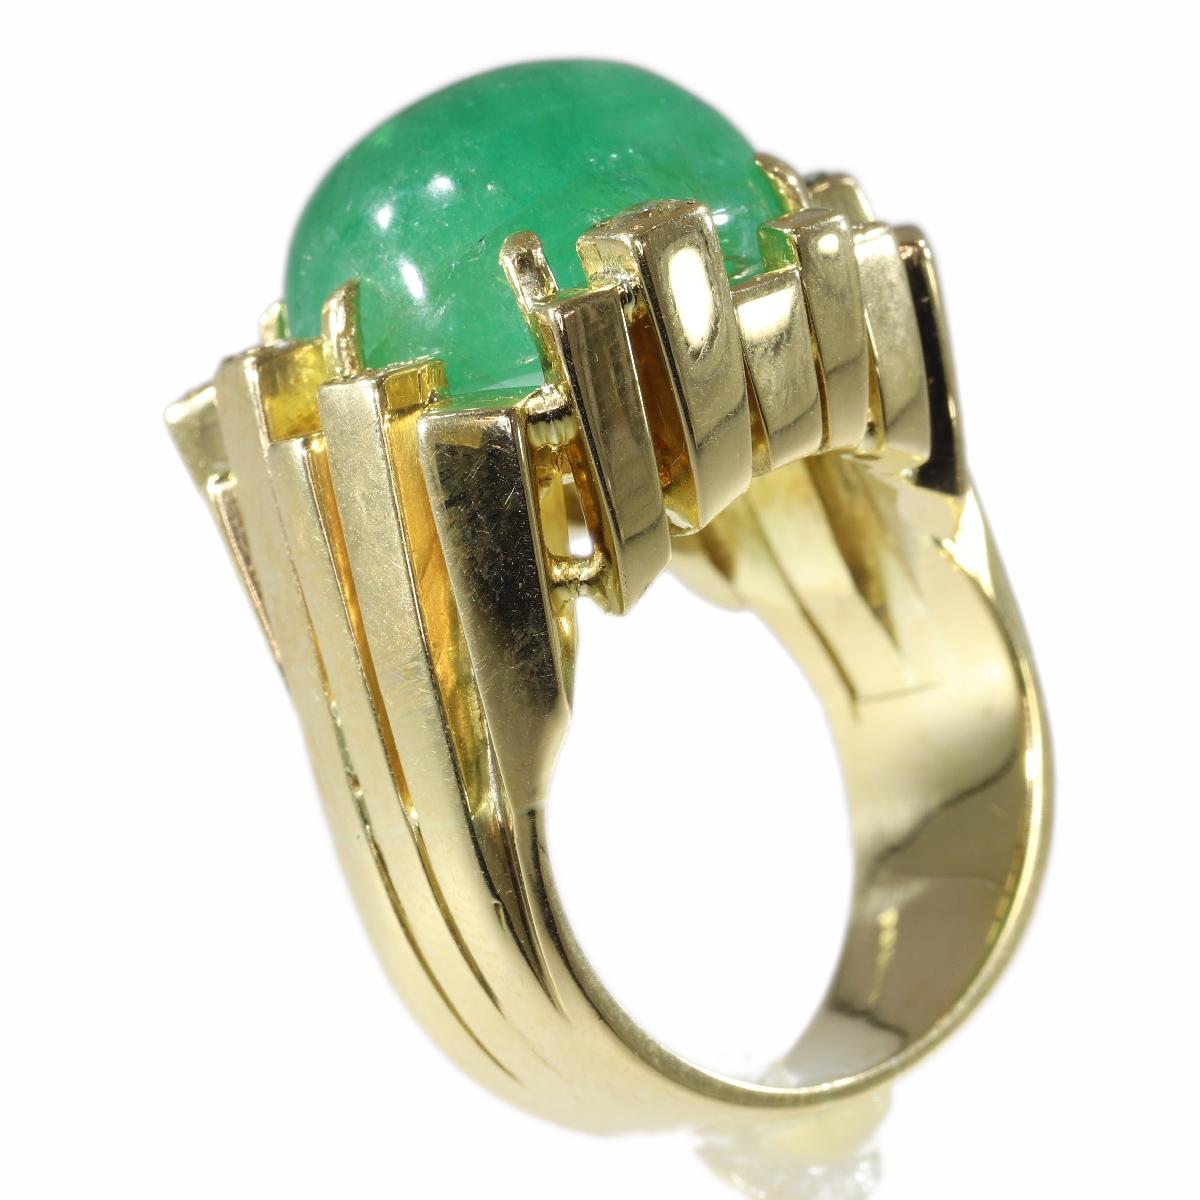 Vintage Seventies Modernistic Artist Design Ring with Large Emerald and Diamonds For Sale 2